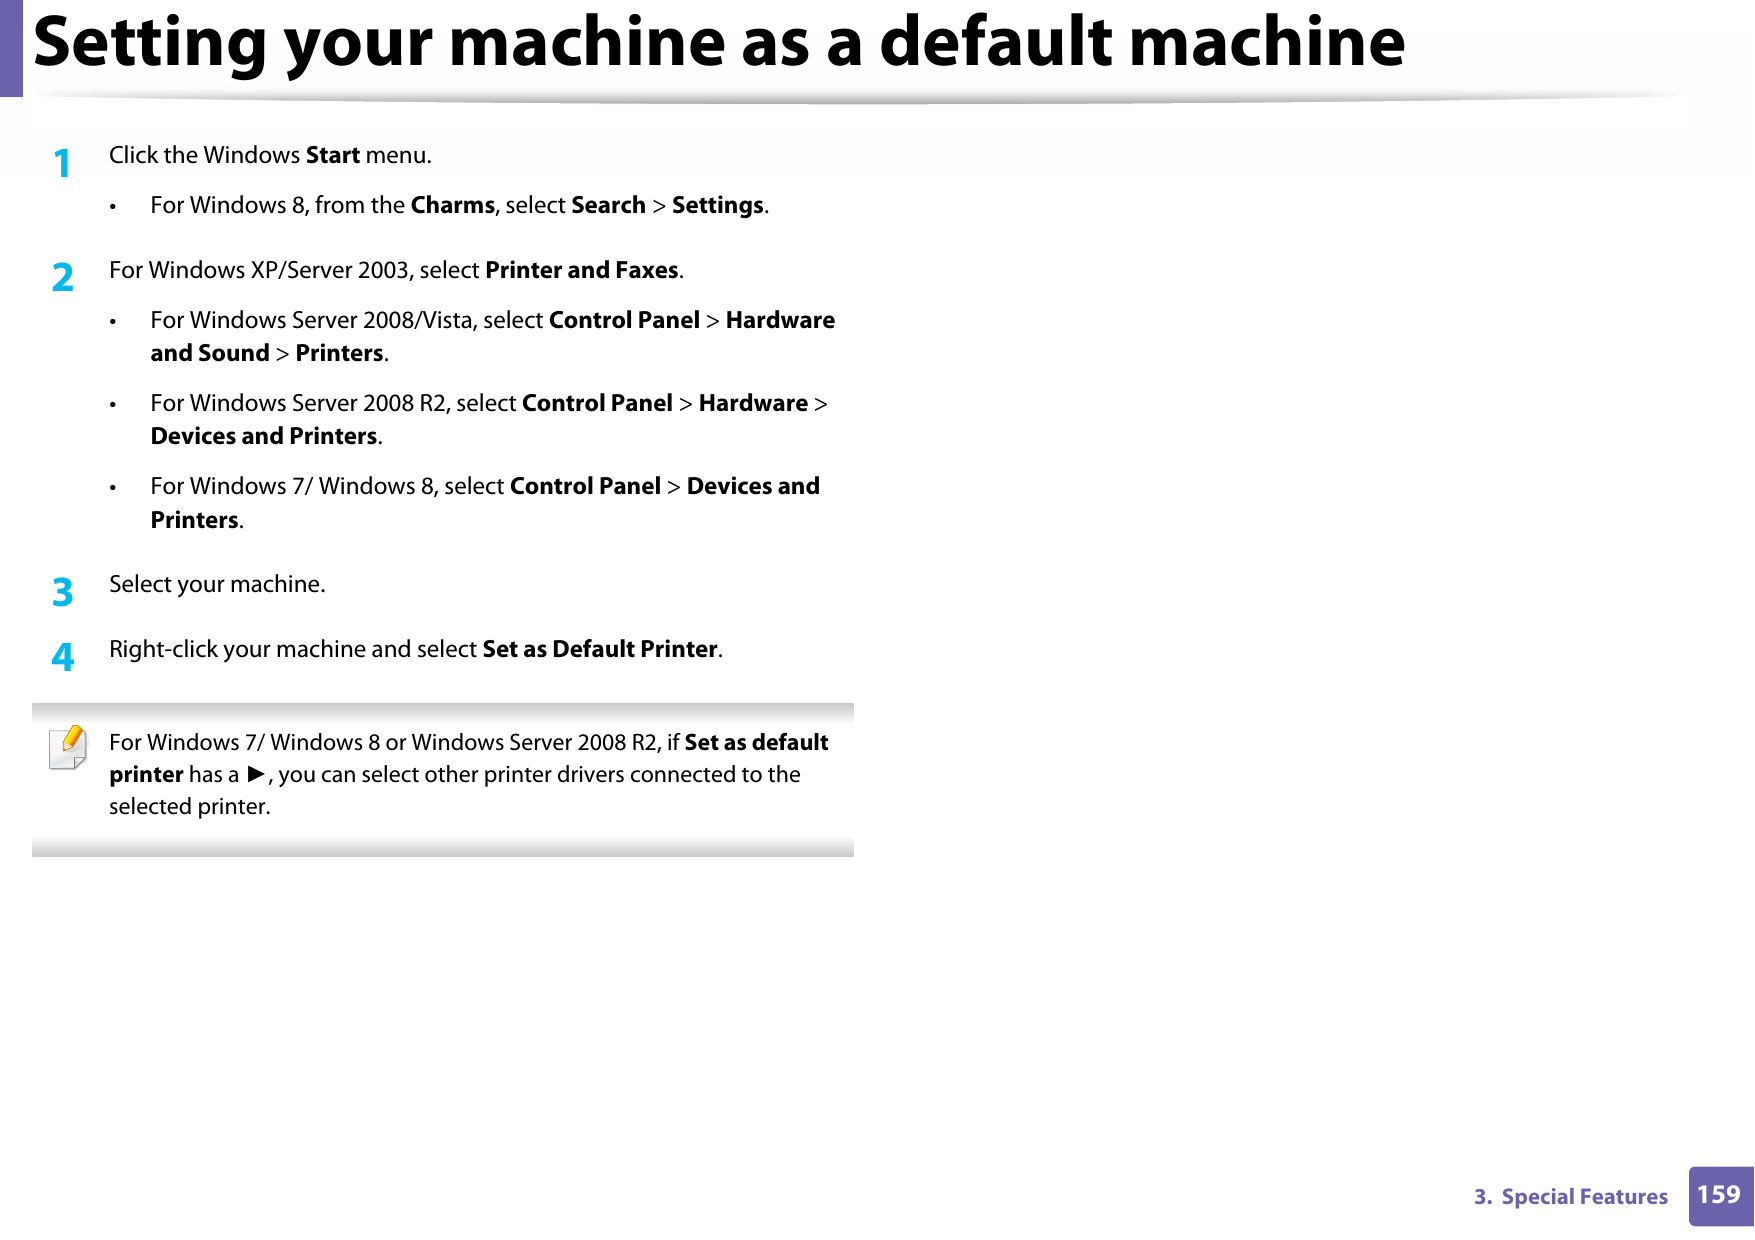 1593.  Special FeaturesSetting your machine as a default machine1Click the Windows Start menu.• For Windows 8, from the Charms, select Search &gt; Settings.2  For Windows XP/Server 2003, select Printer and Faxes. • For Windows Server 2008/Vista, select Control Panel &gt; Hardware and Sound &gt; Printers. • For Windows Server 2008 R2, select Control Panel &gt; Hardware &gt; Devices and Printers. • For Windows 7/ Windows 8, select Control Panel &gt; Devices and Printers. 3  Select your machine.4  Right-click your machine and select Set as Default Printer. For Windows 7/ Windows 8 or Windows Server 2008 R2, if Set as default printer has a ►, you can select other printer drivers connected to the selected printer. 